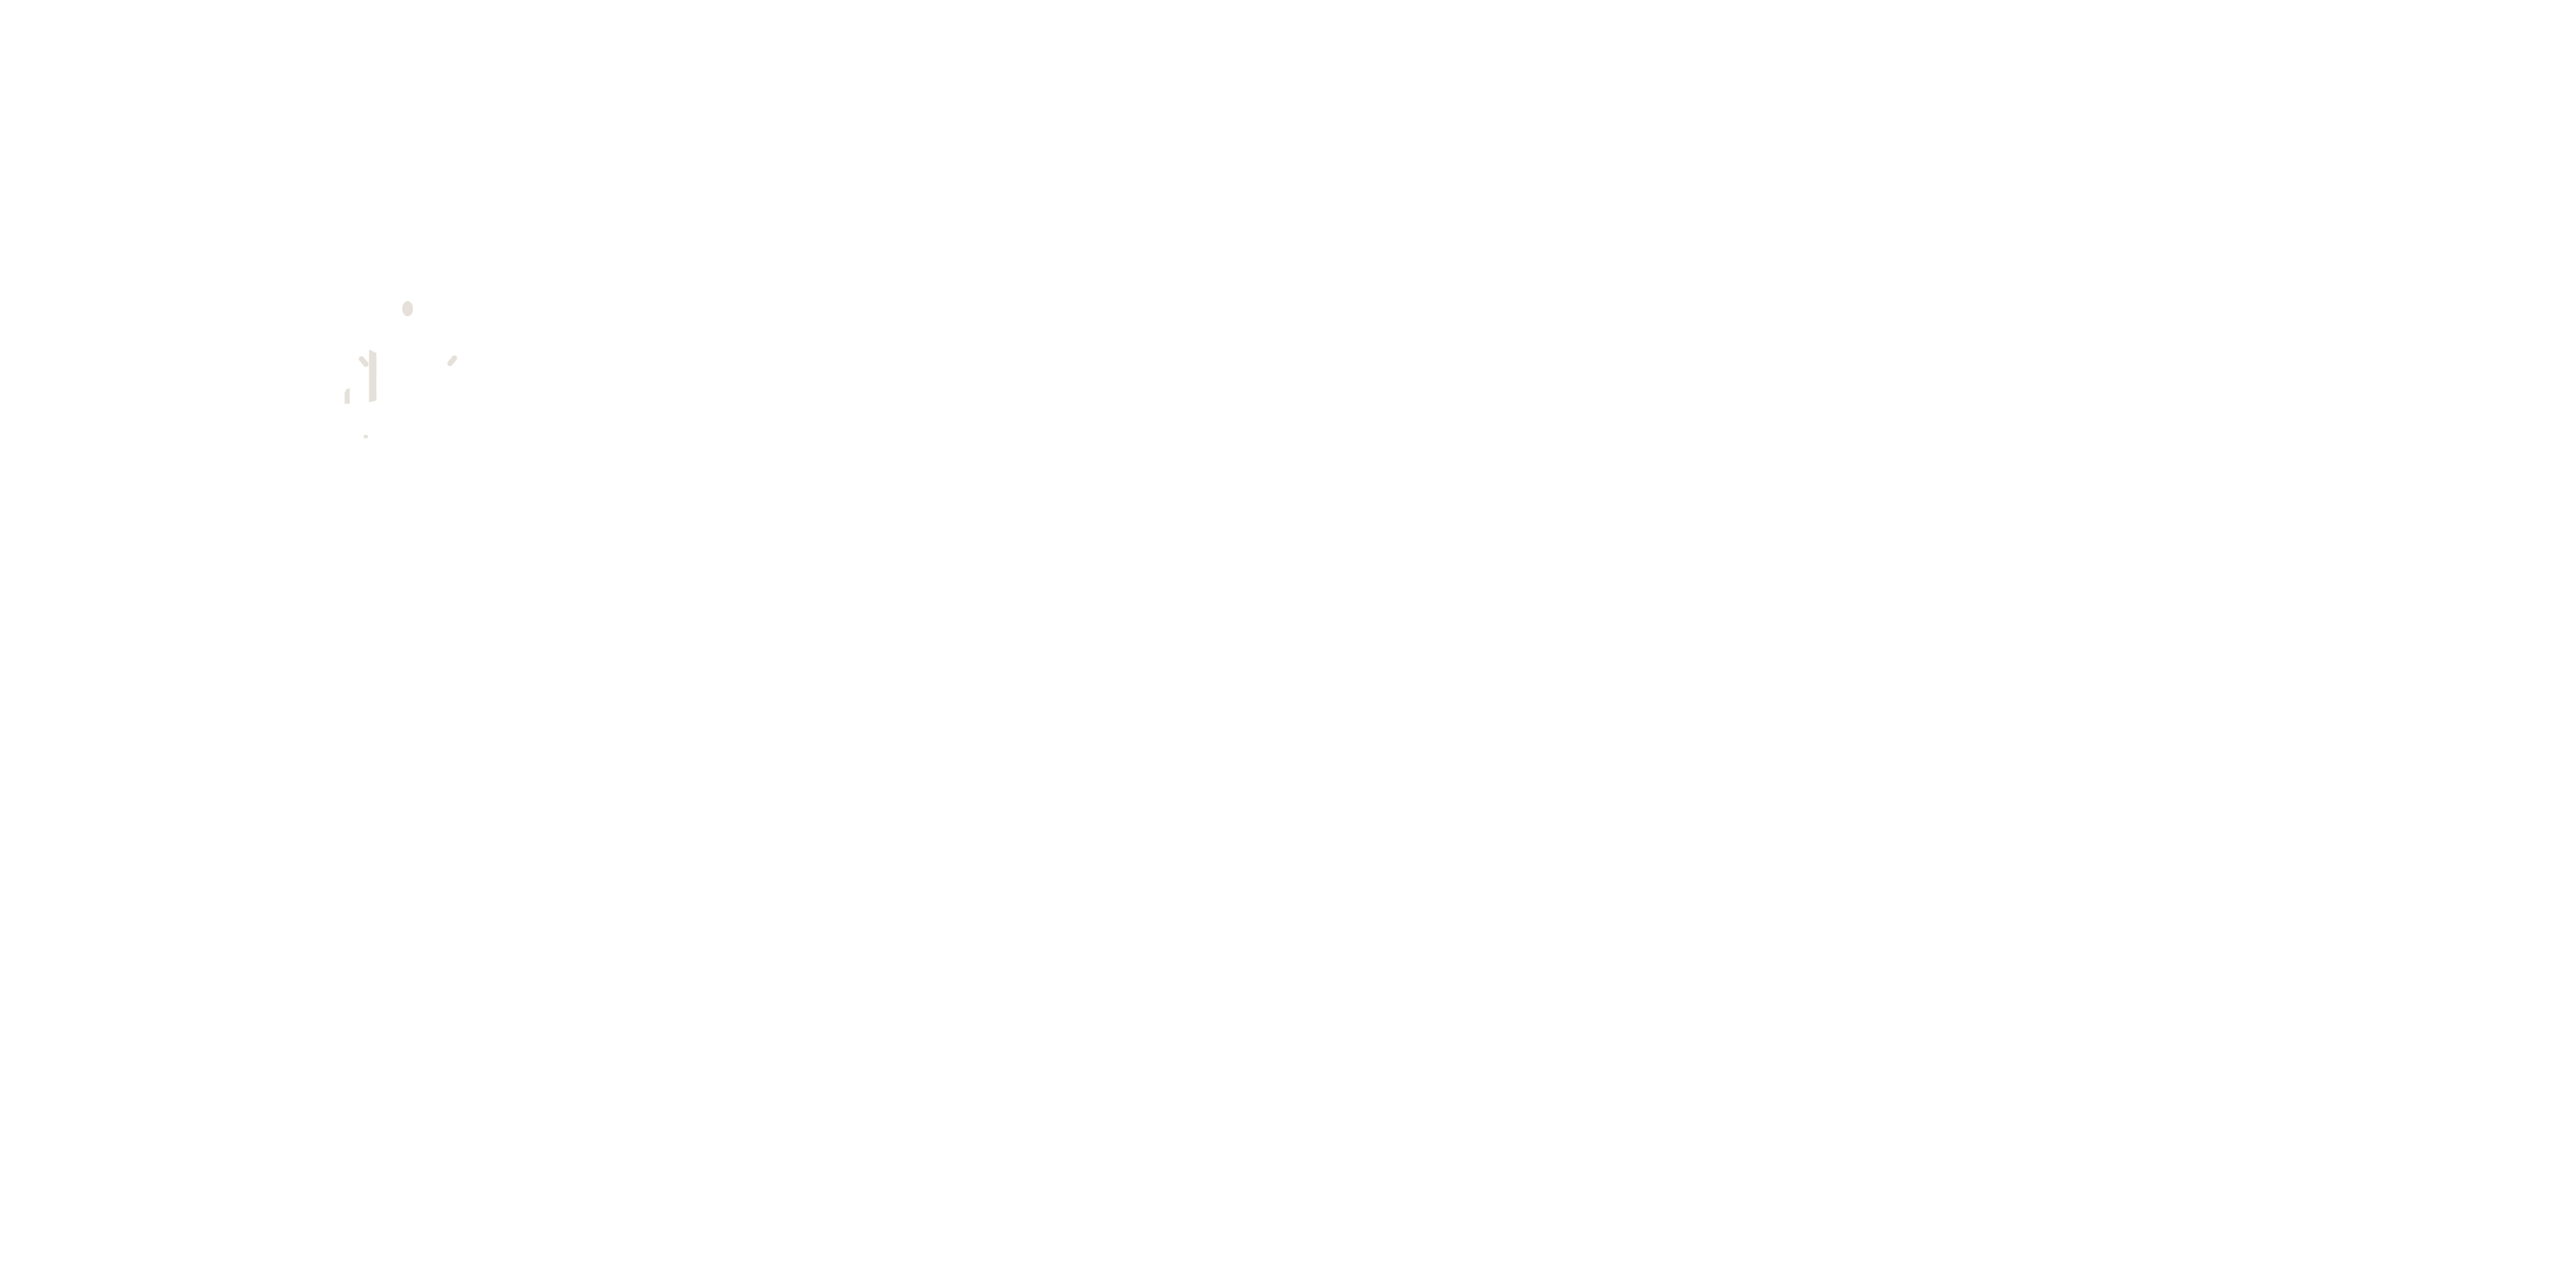 LightHouse Financial Group